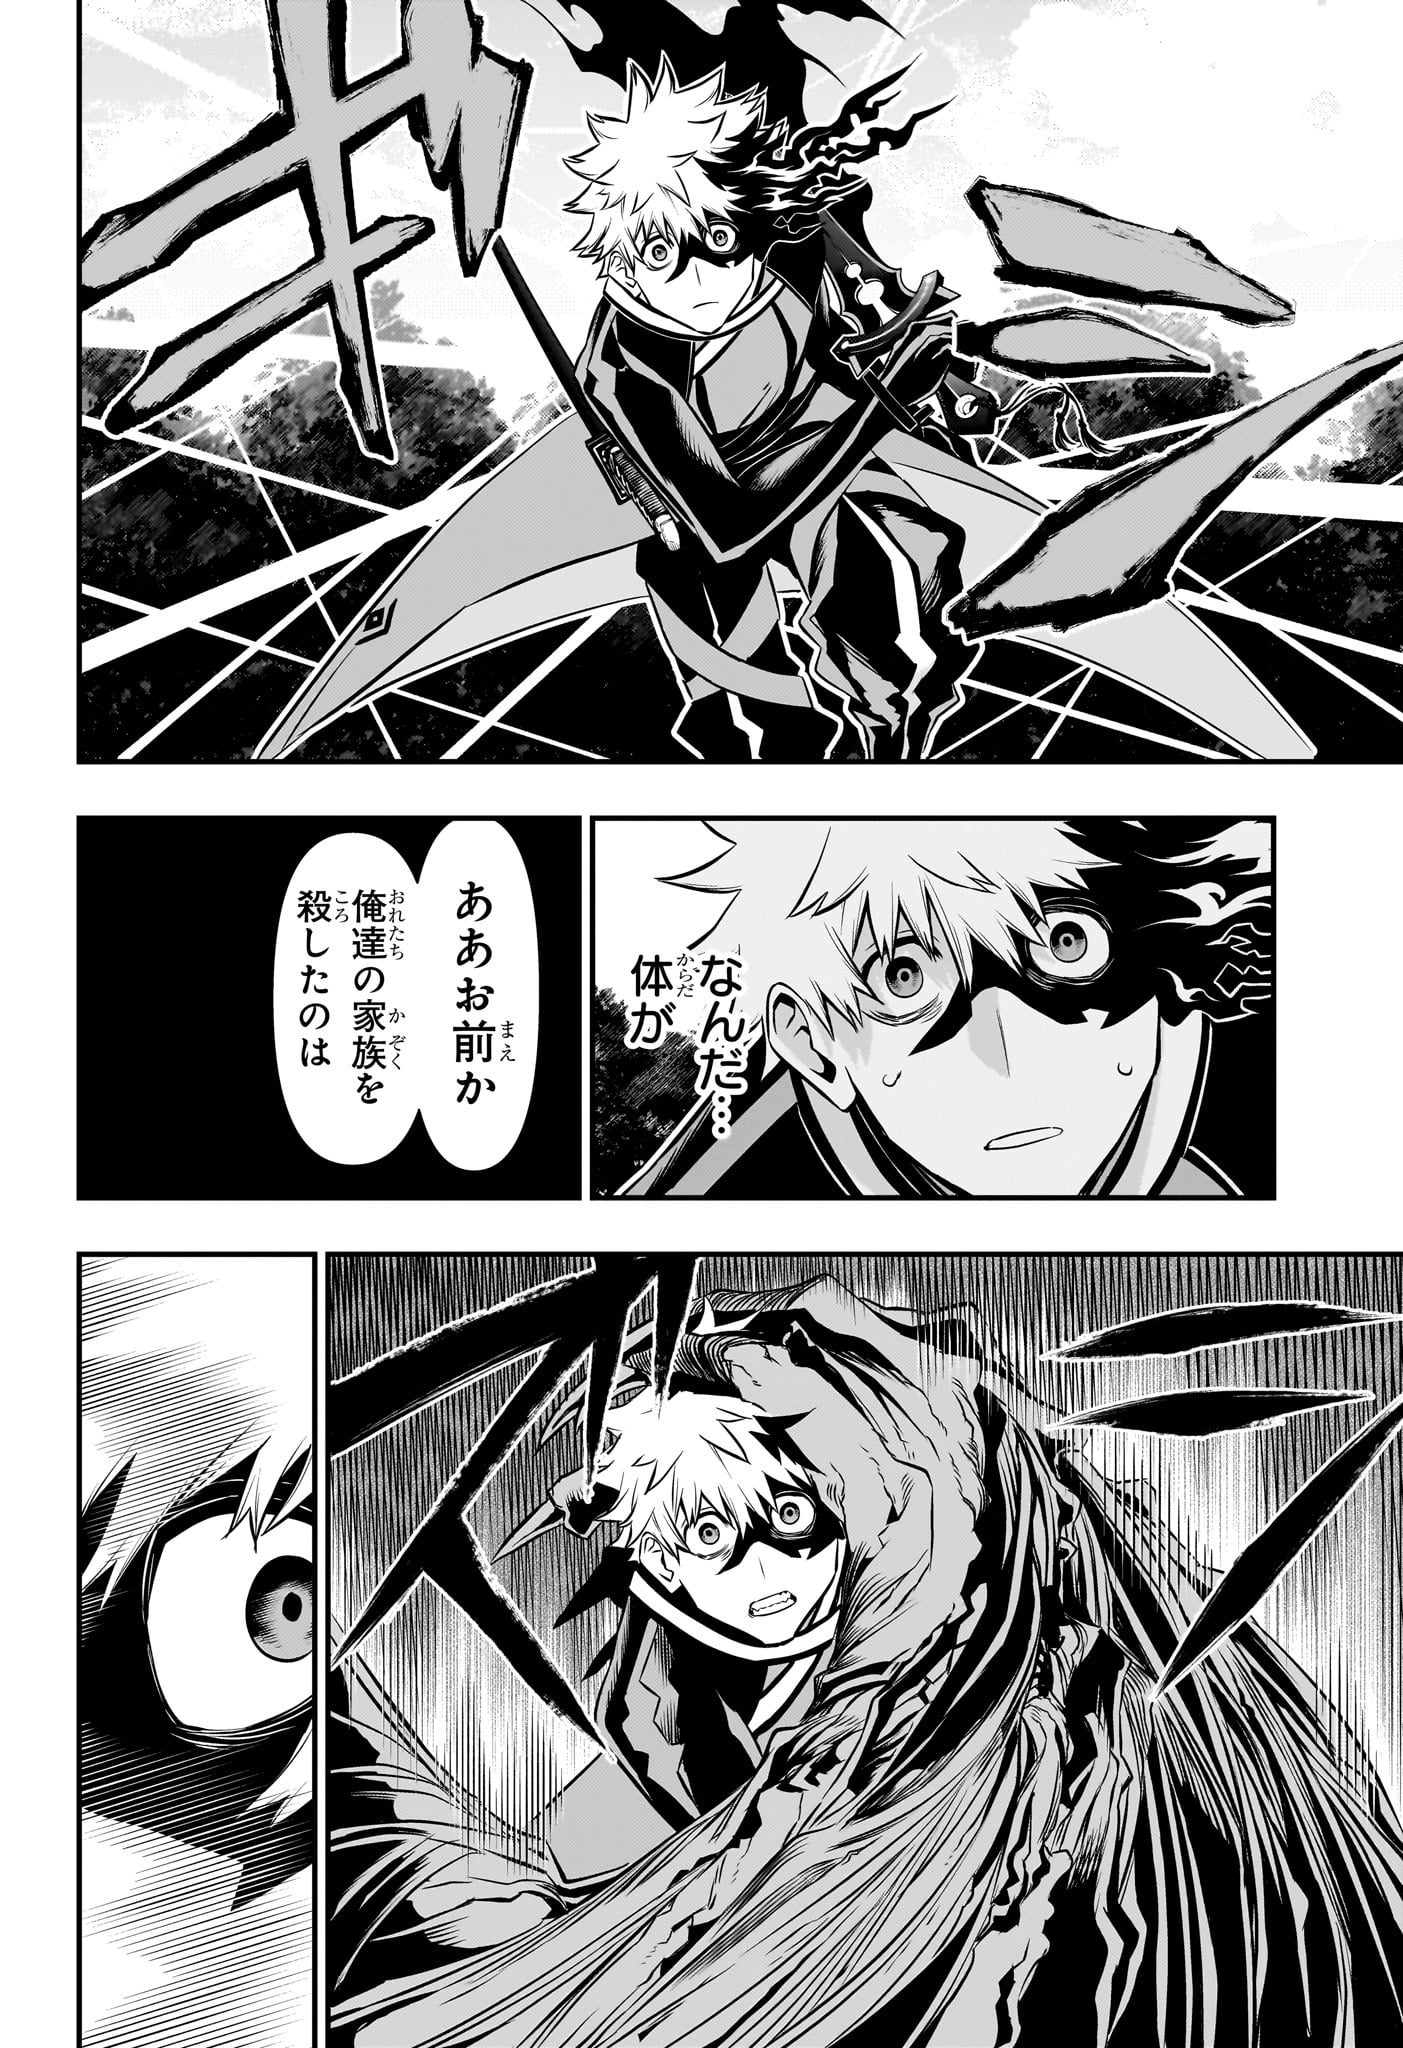 Nue no Onmyouji - Chapter 41 - Page 2